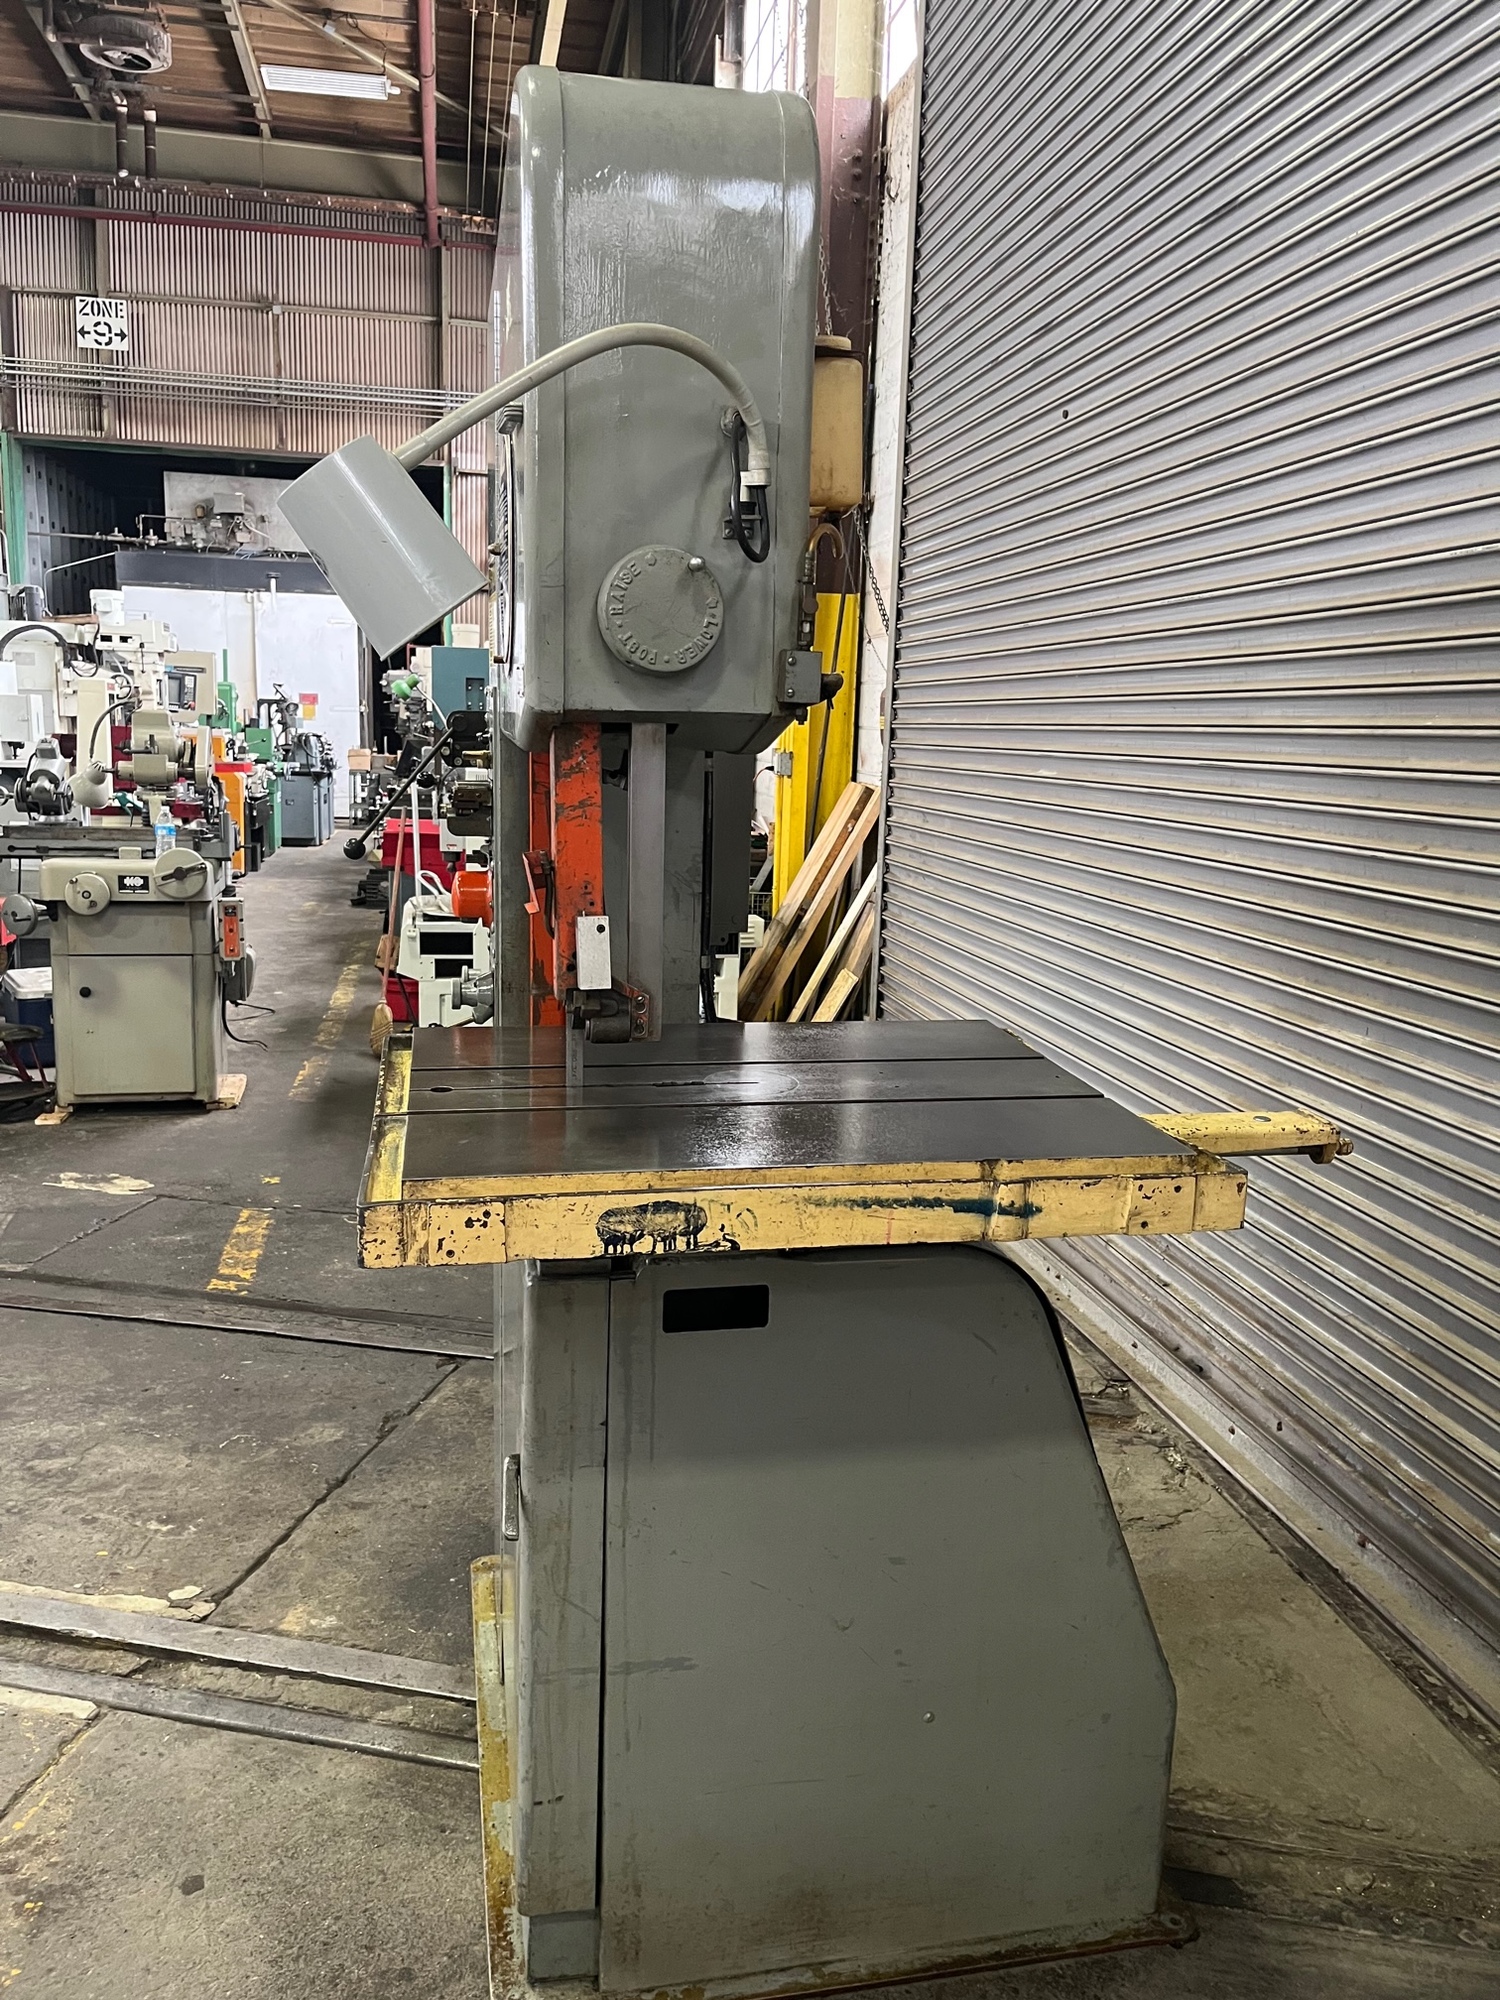 1977 DOALL 2012-1H Vertical Band Saws | Michael Fine Machinery Co., Inc.